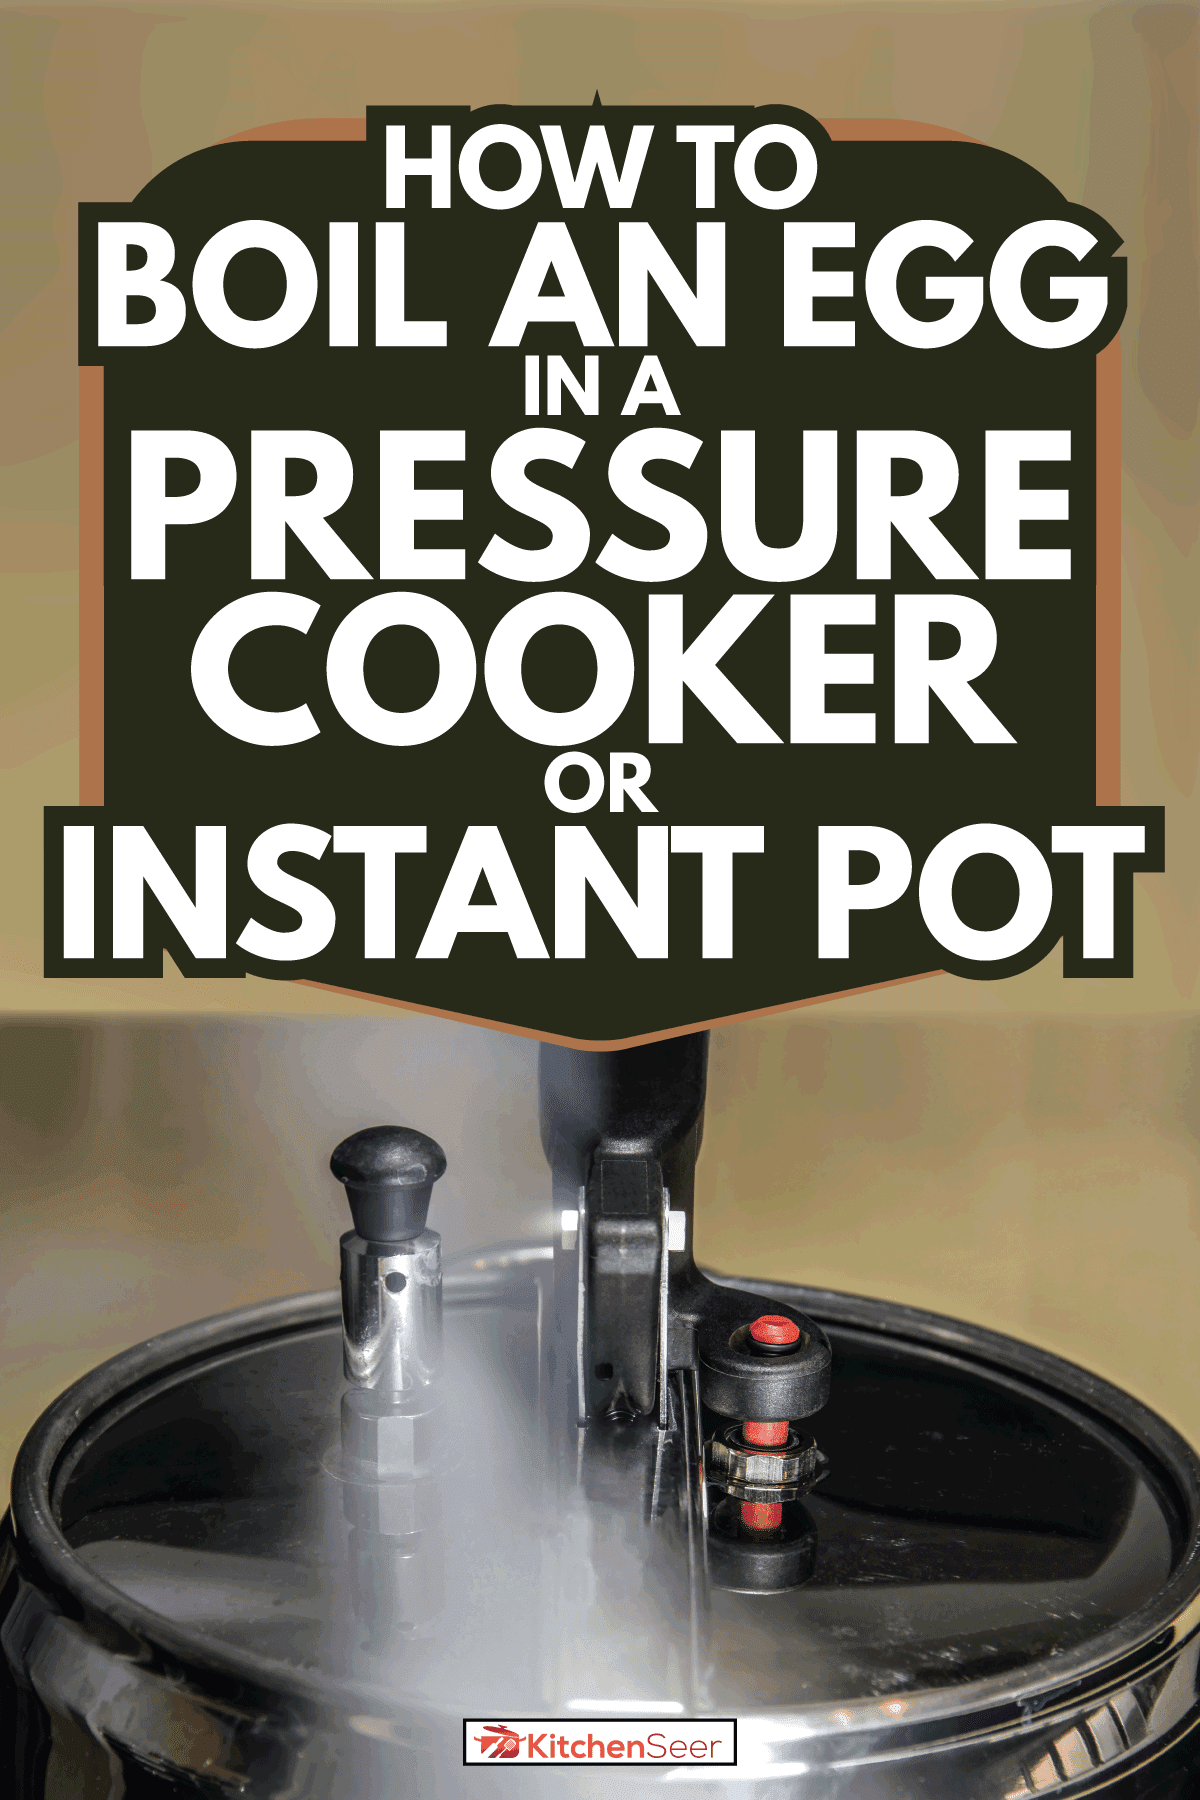 Pressure cooker releasing hot steam. How To Boil An Egg In A Pressure Cooker Or Instant Pot